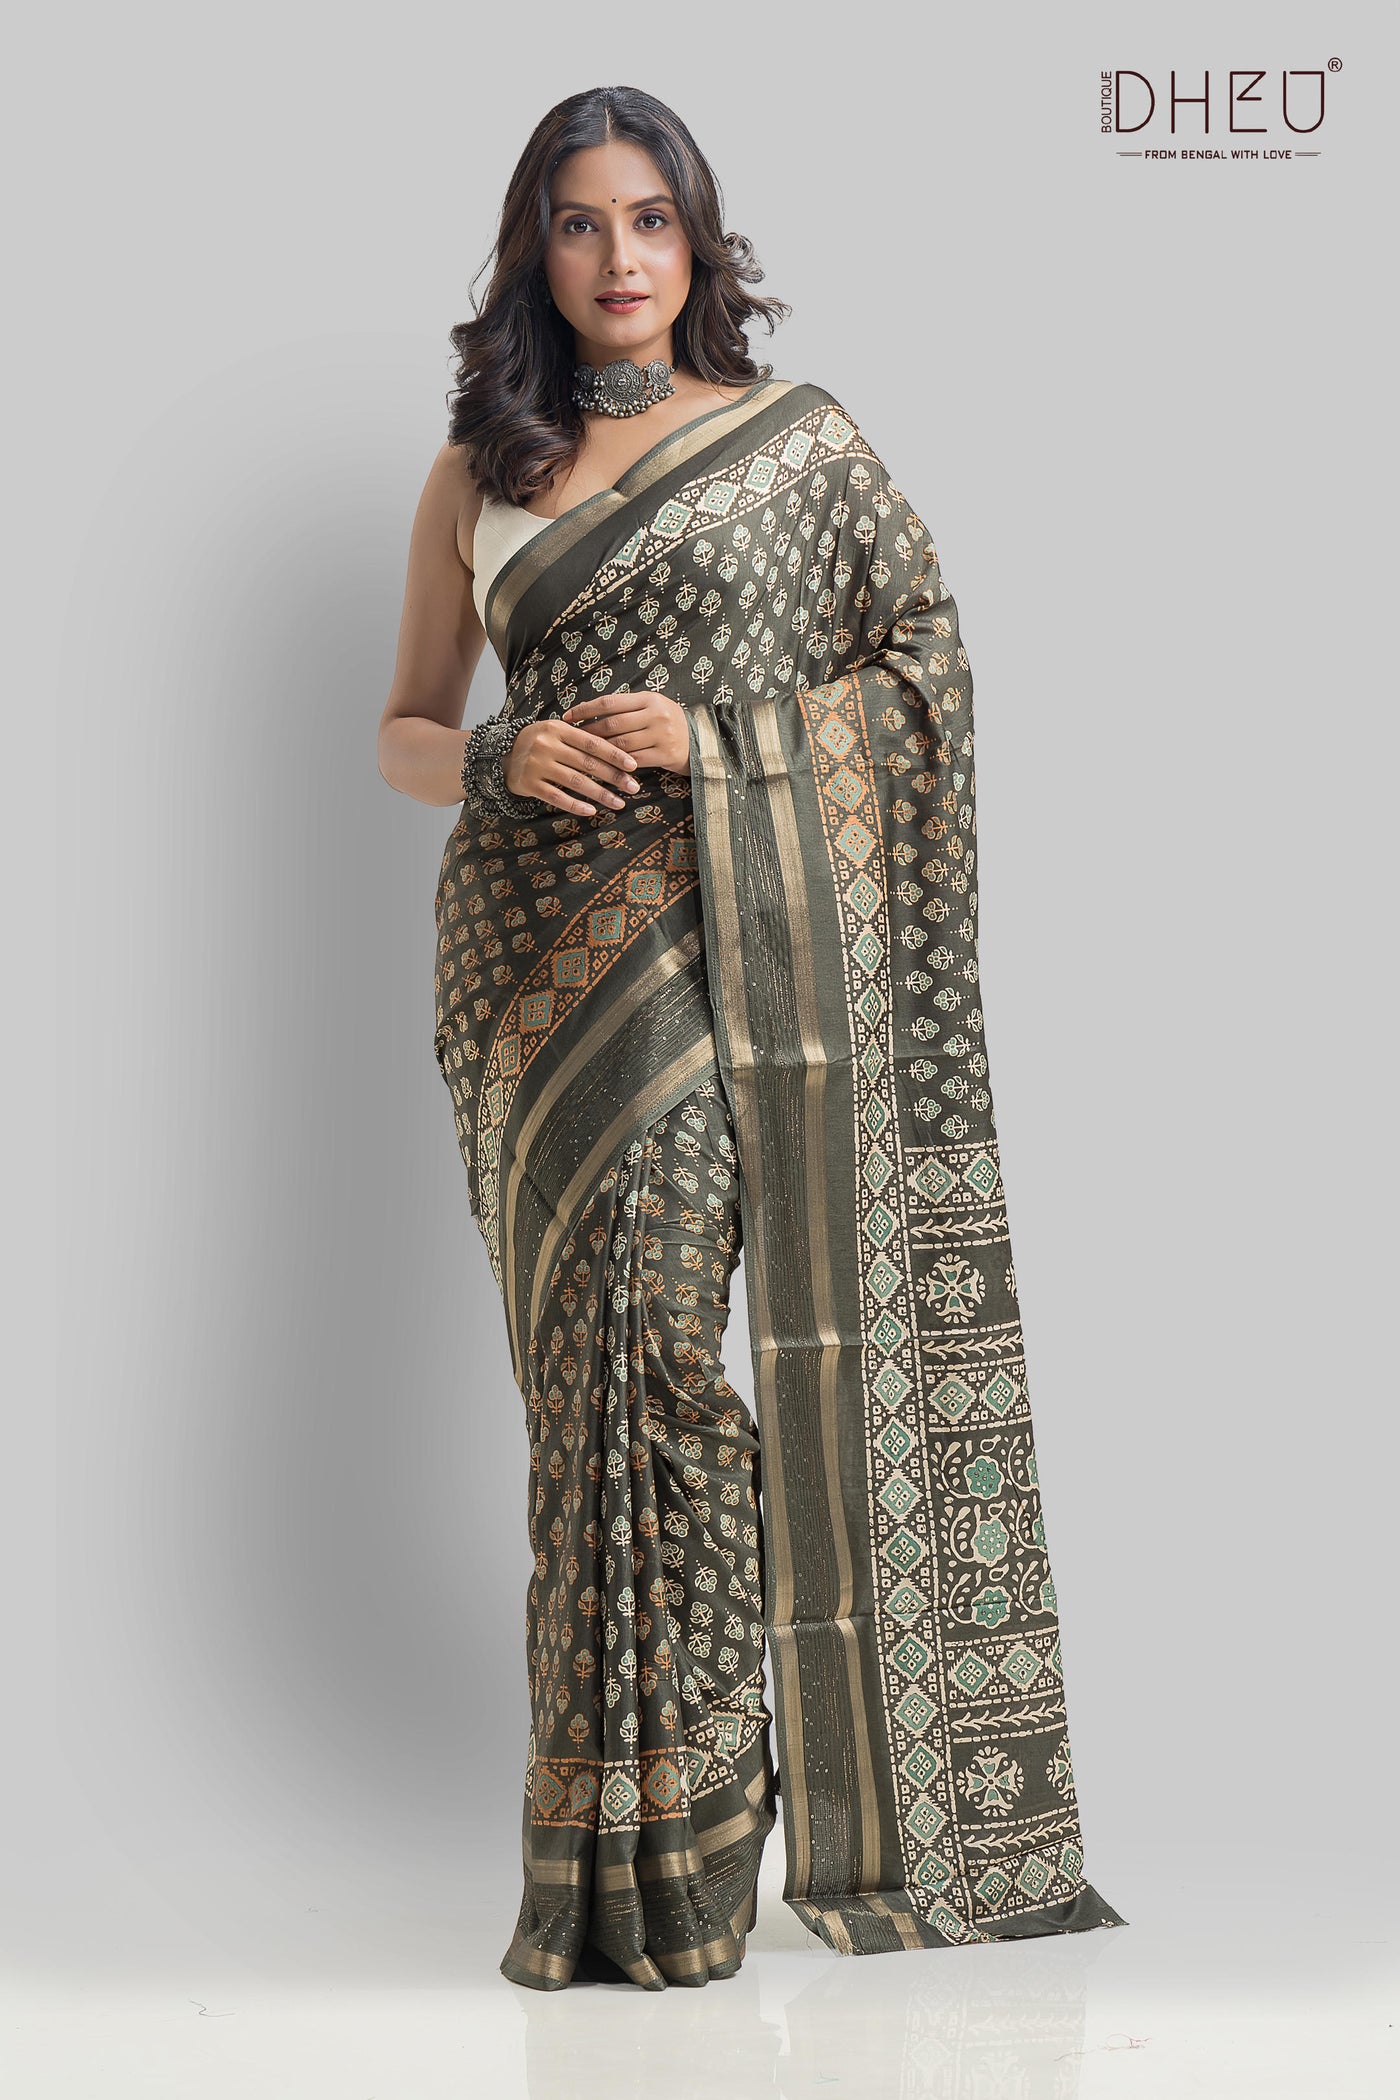 Designer Handloom Cotton with Ajrakh print saree at lowest price at dheu.in